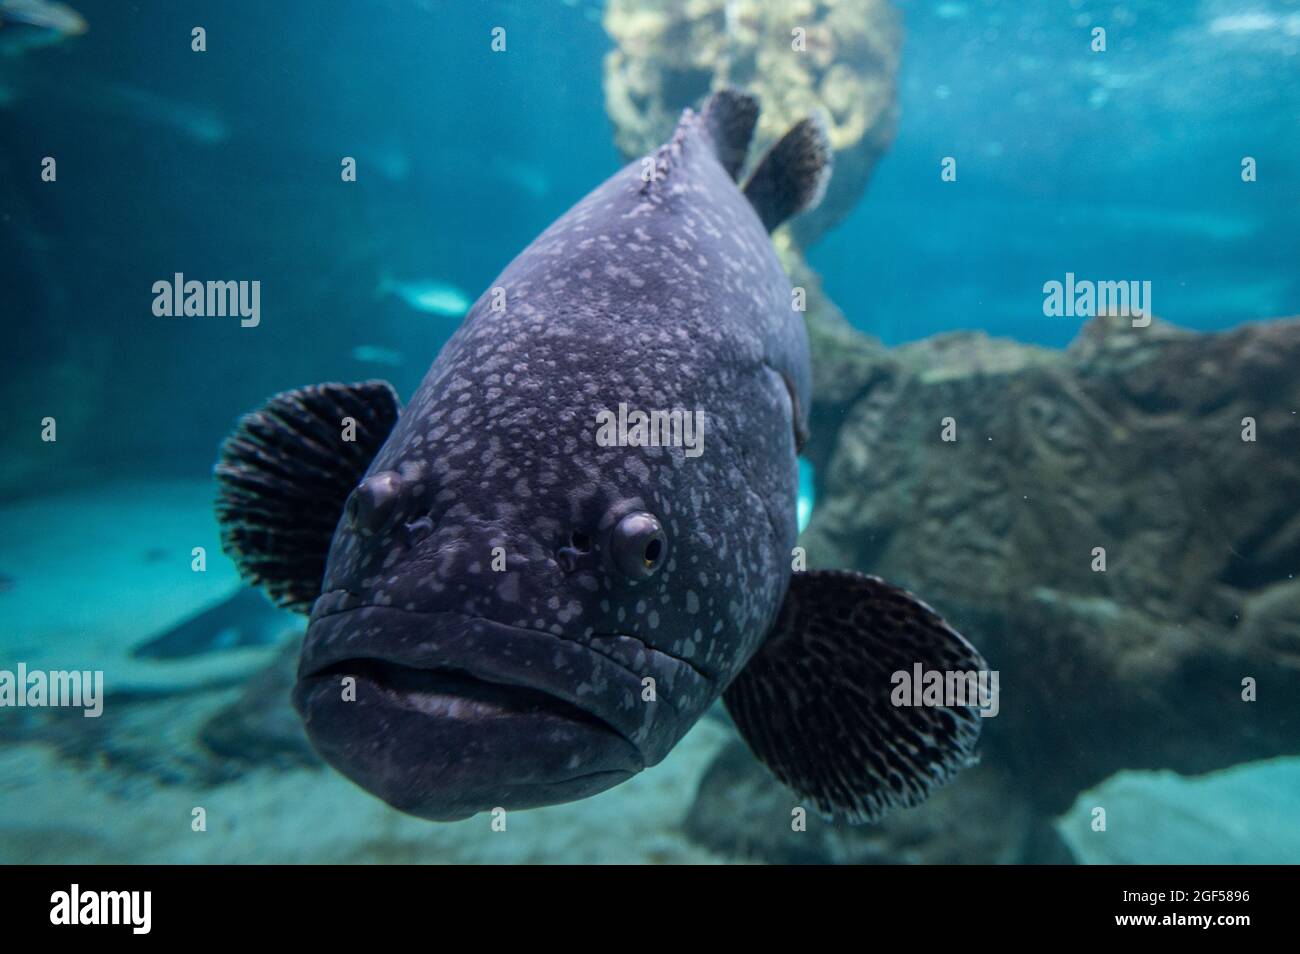 Madrid, Spain. 23rd Aug, 2021. A giant grouper (Epinephelus lanceolatus), also known as the Queensland grouper, brindle grouper or mottled-brown sea bass, swimming in its enclosure during a summer day with high temperatures in the Zoo Aquarium of Madrid. Credit: Marcos del Mazo/Alamy Live News Stock Photo